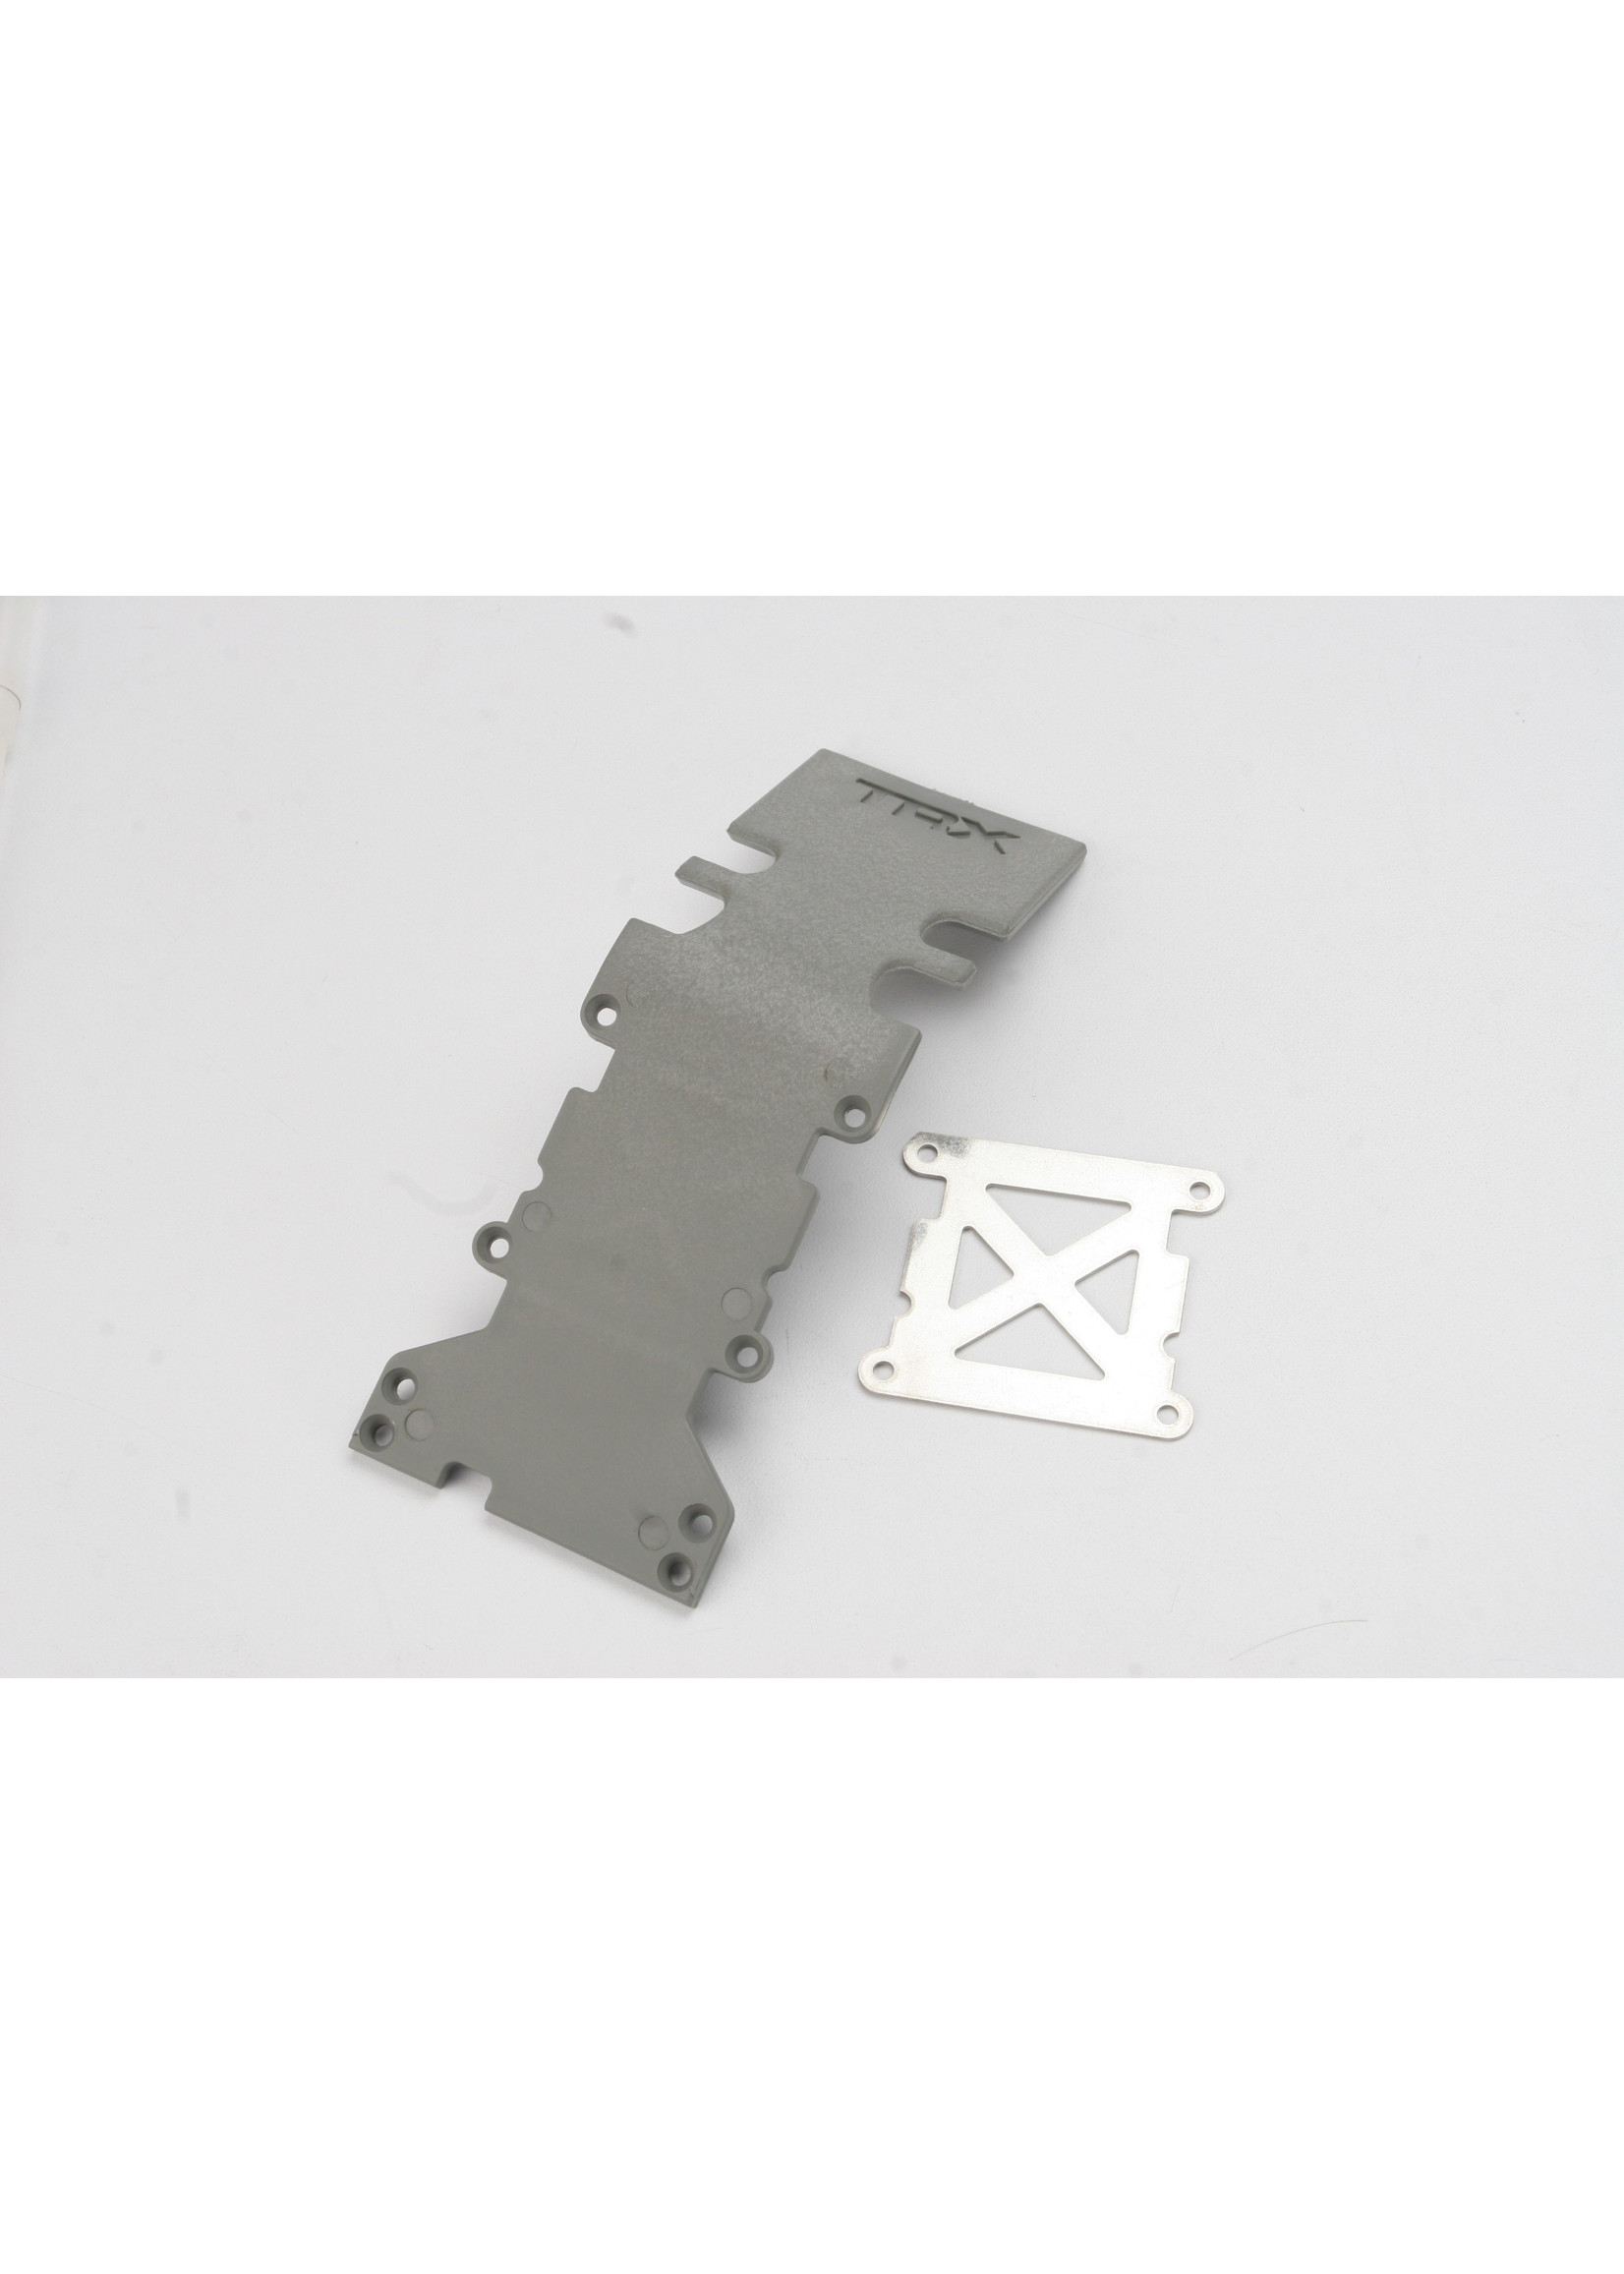 Traxxas 4938A - Rear Skid Plate - Gray/Stainless Steel